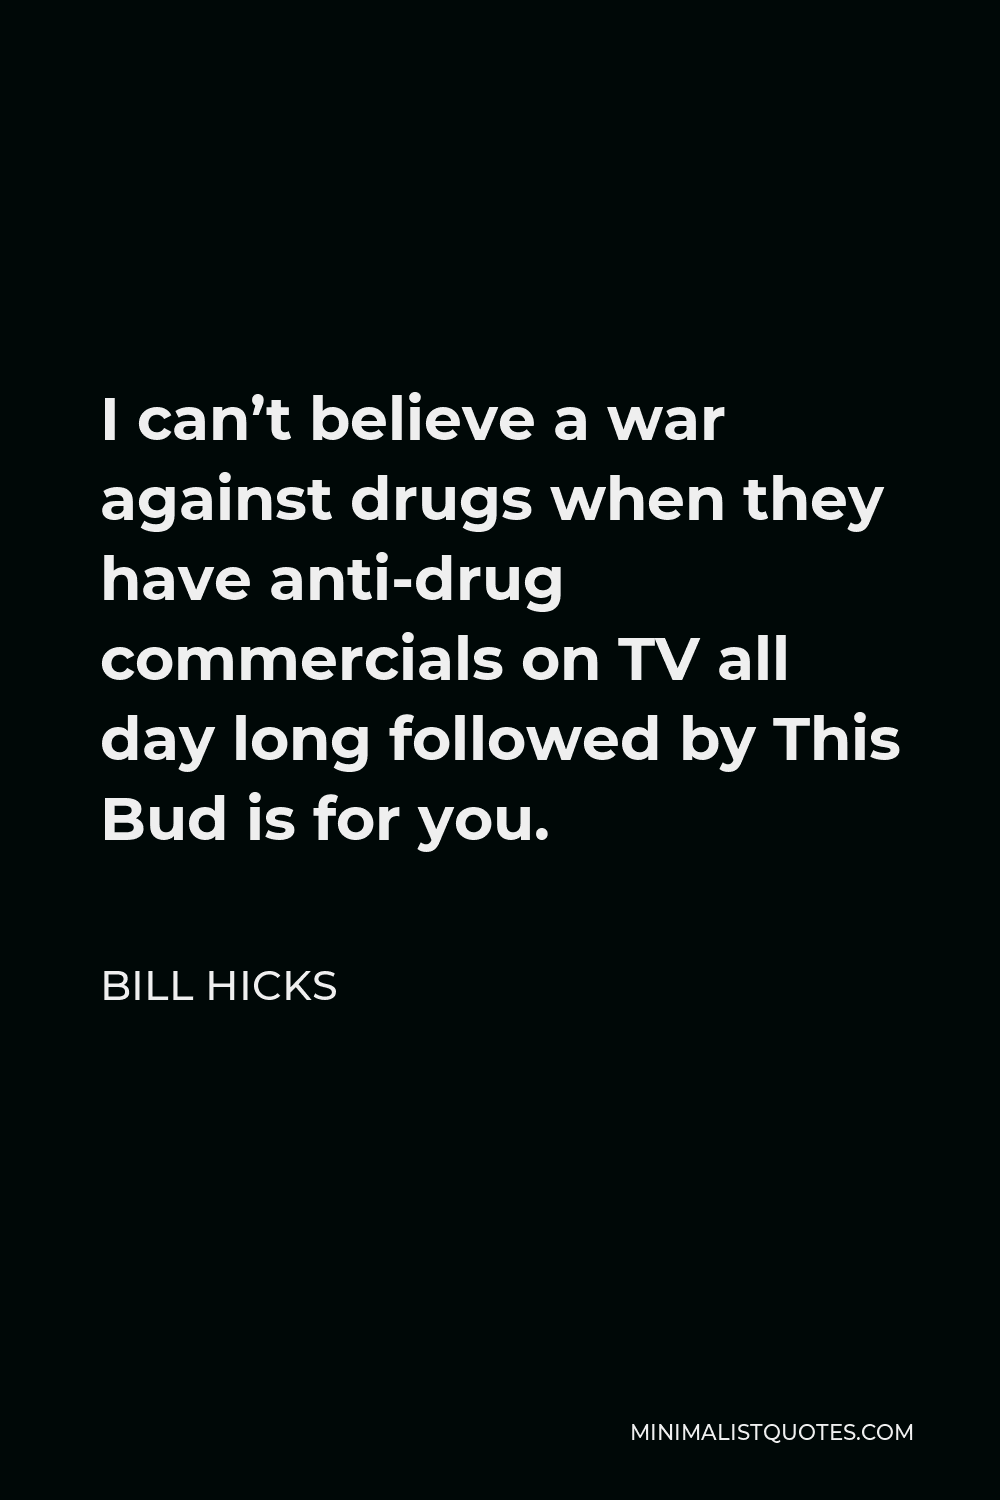 Bill Hicks Quote - I can’t believe a war against drugs when they have anti-drug commercials on TV all day long followed by This Bud is for you.